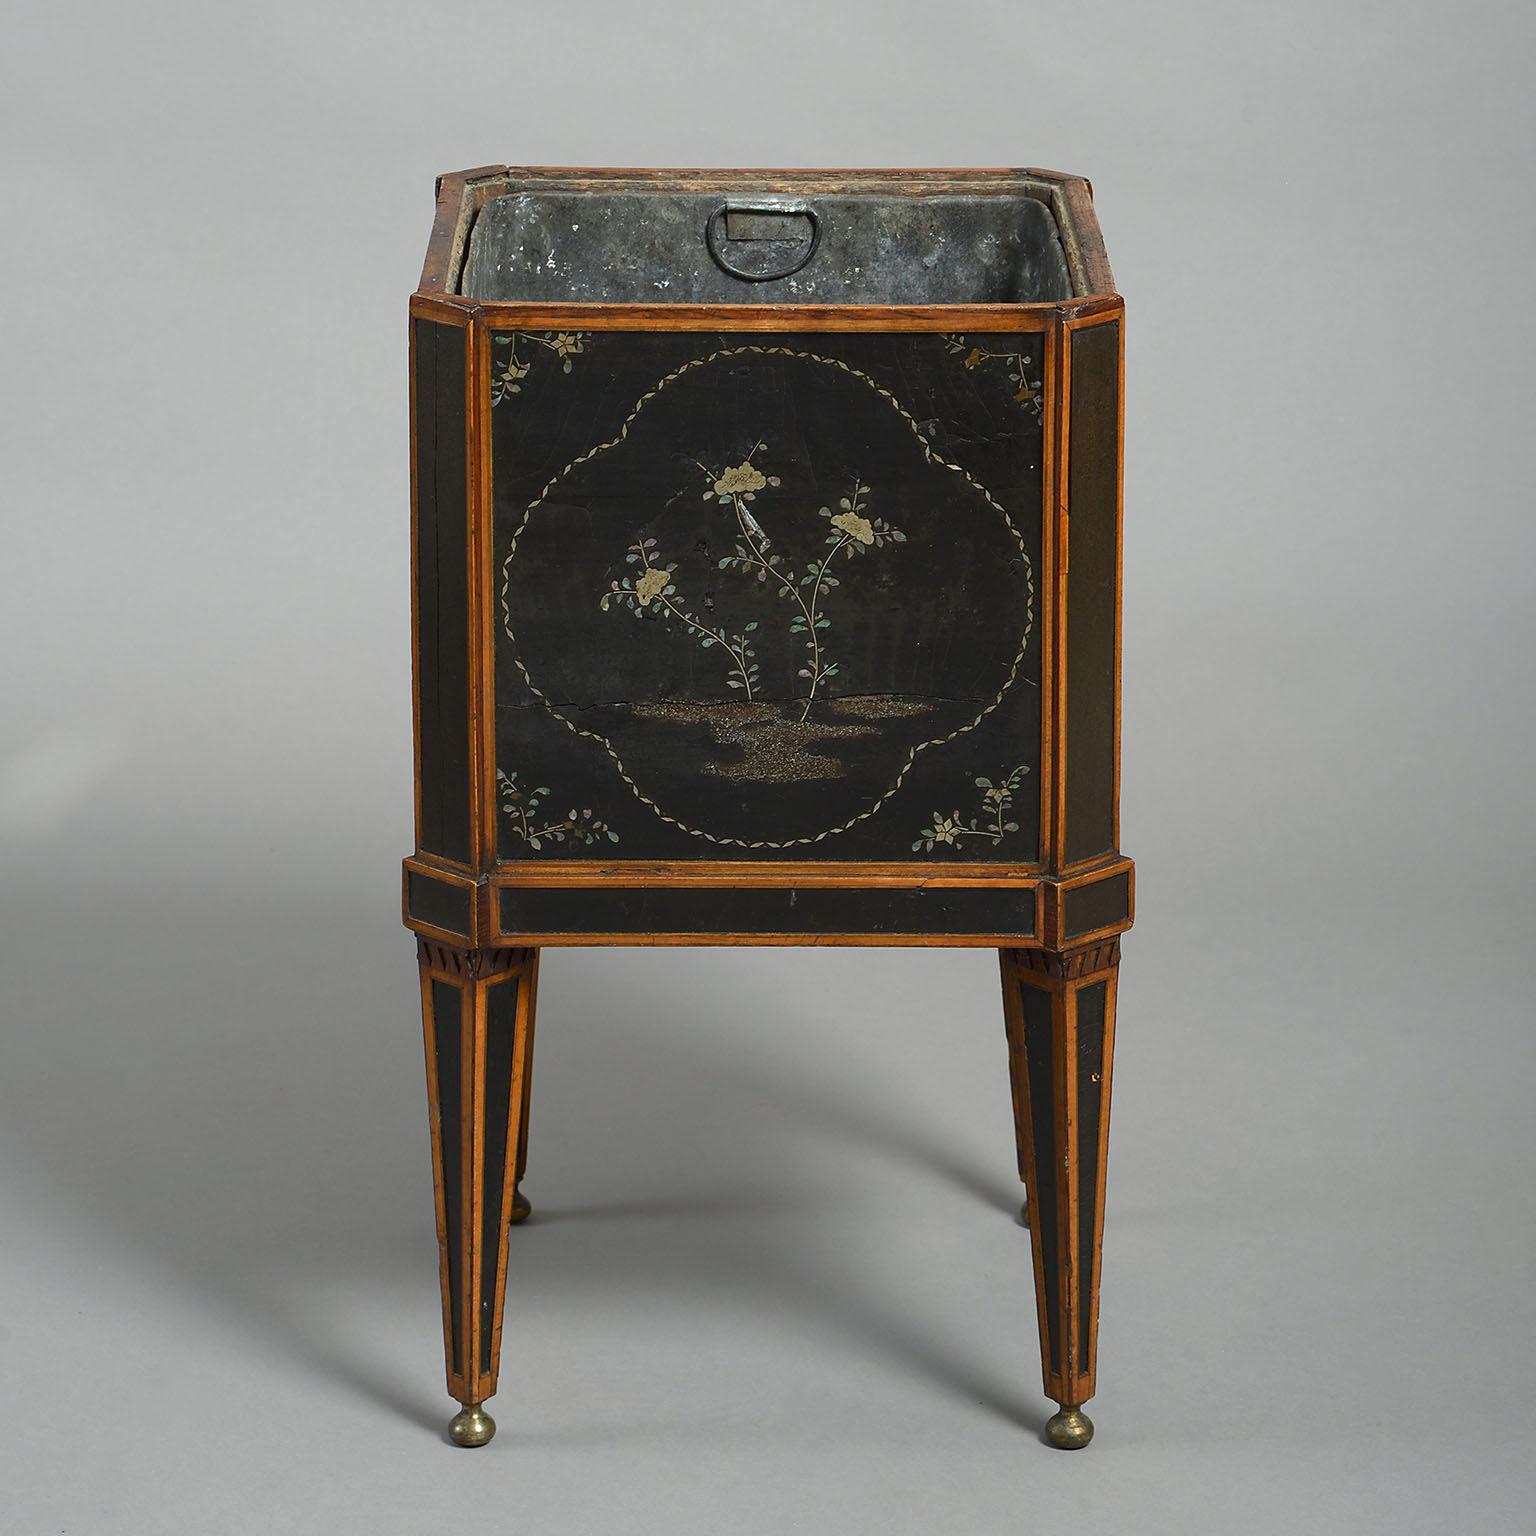 18th Century Dutch Lacquer-Mounted Teestoof, Jardinière or Wine Cooler 1